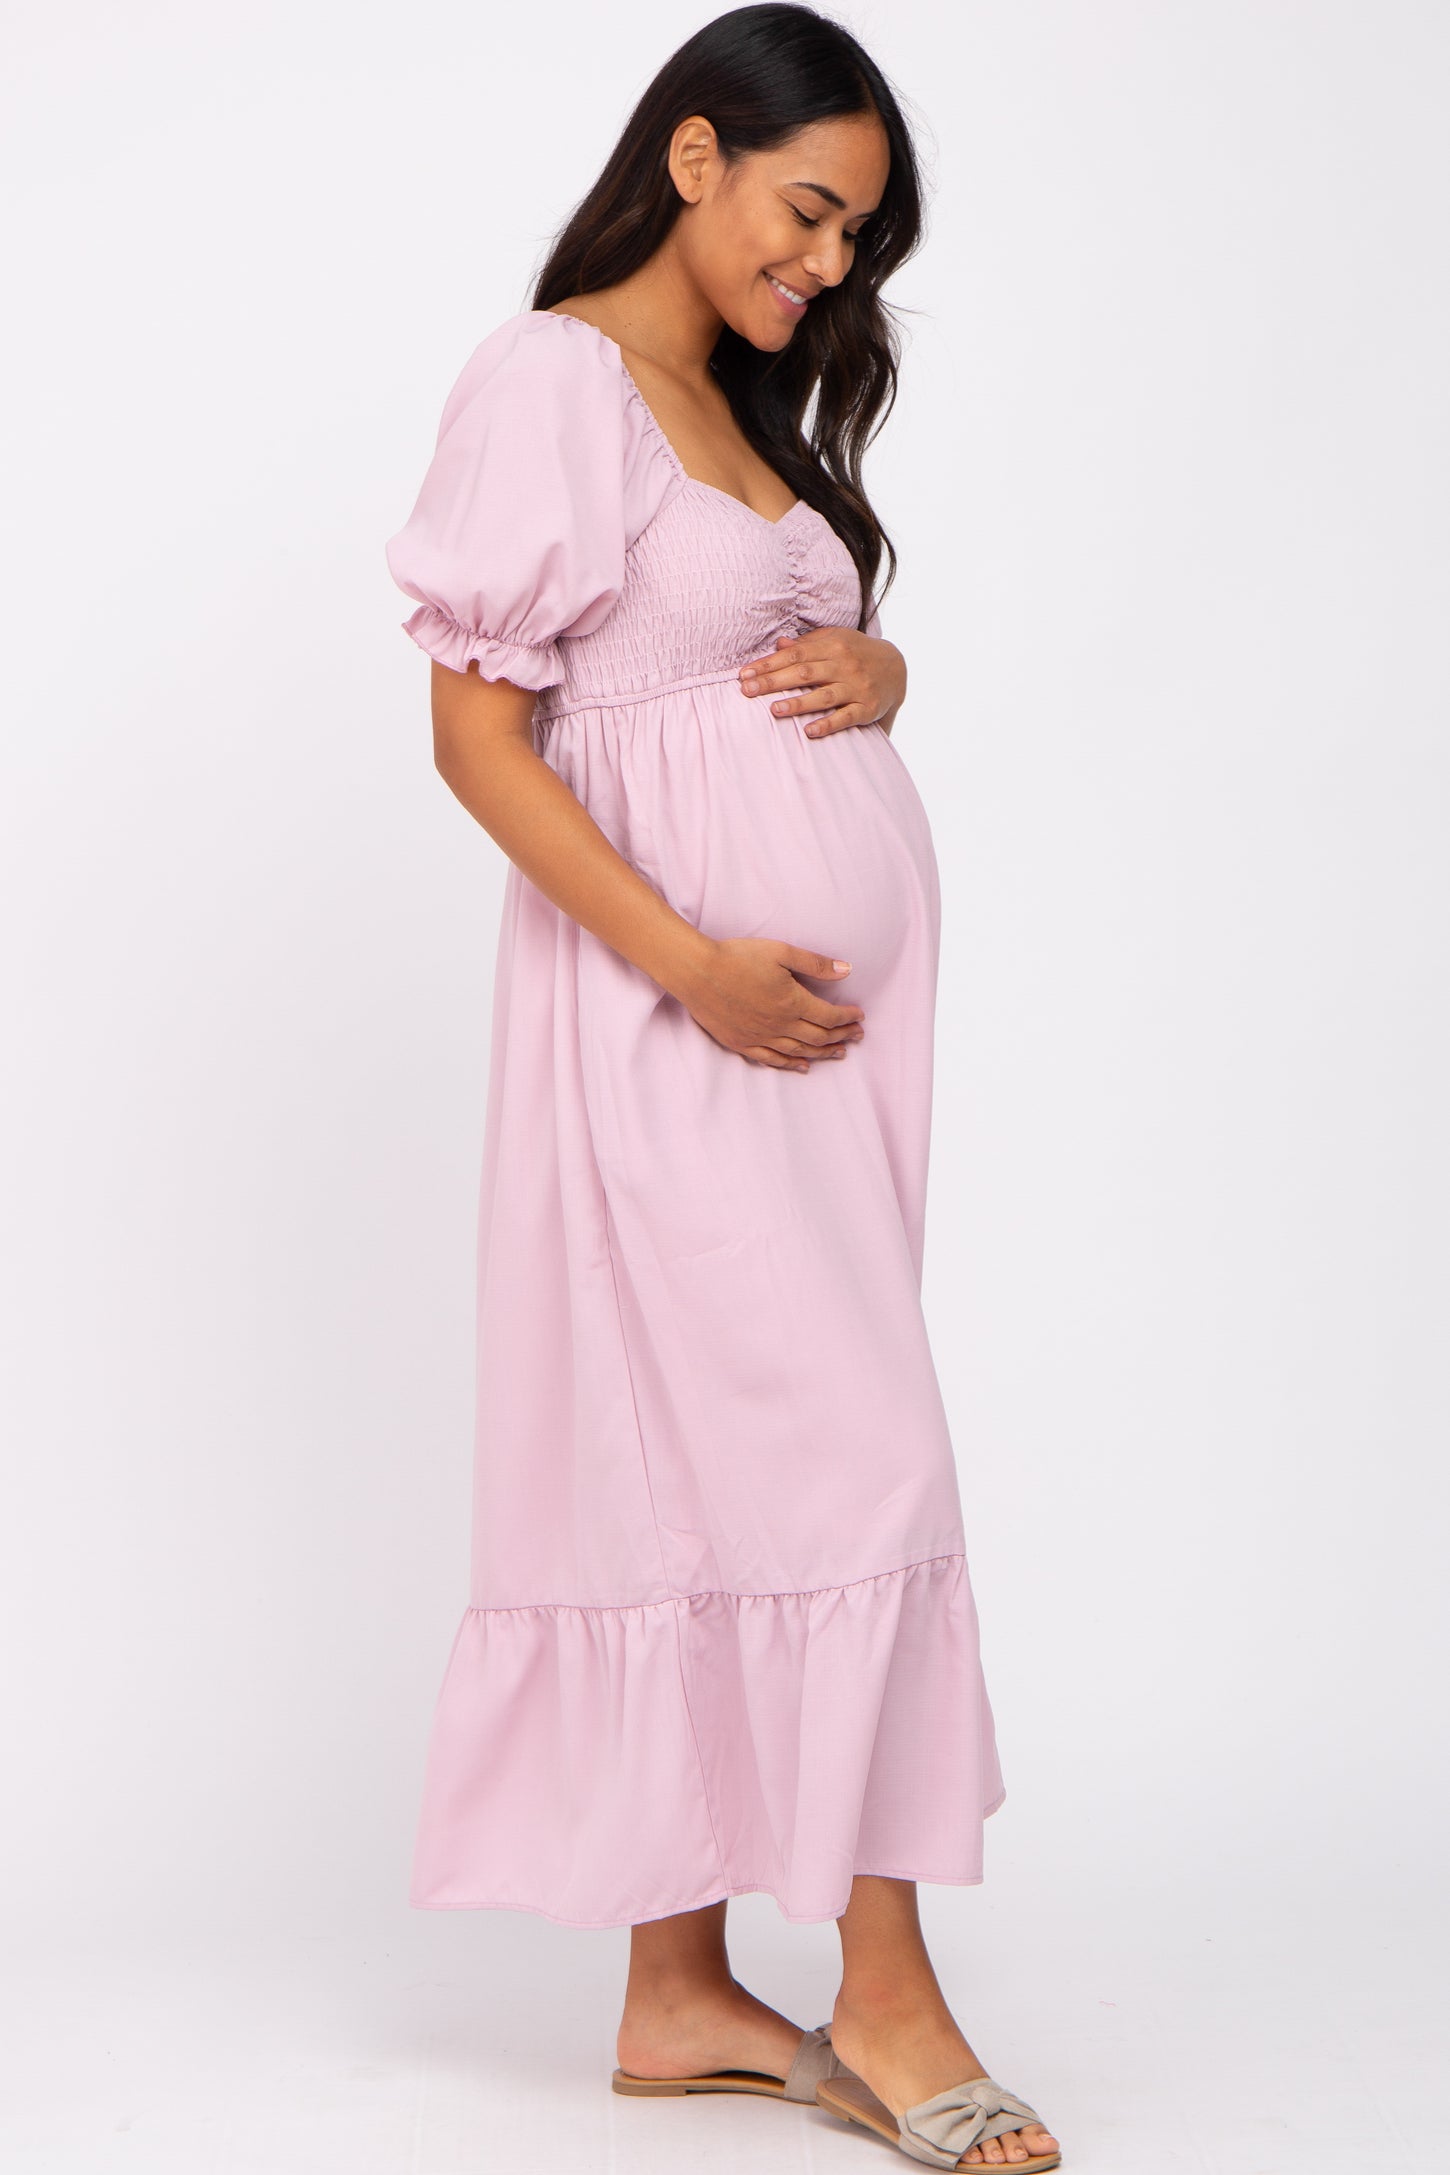 Frosty Pink Blanqi Maternity Cap Sleeve Crew Neck Dress (Gently